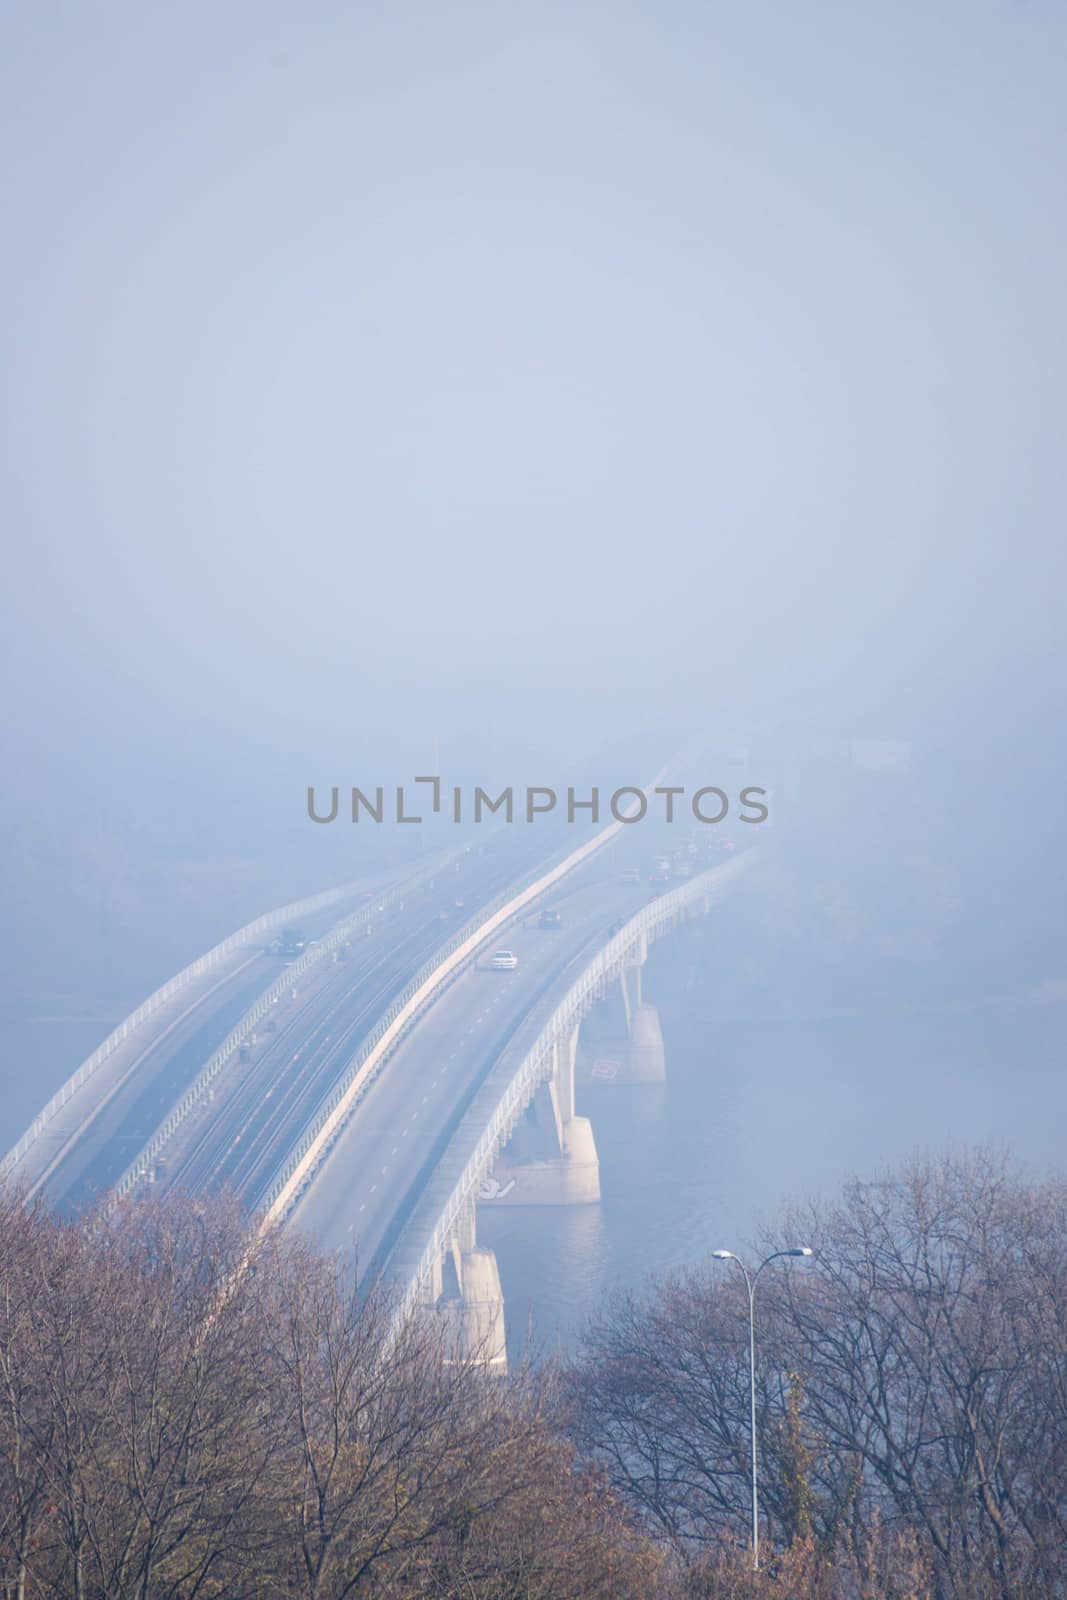 Autumn fog and river steel bridge with subway train on blurred background. Forest in foreground.